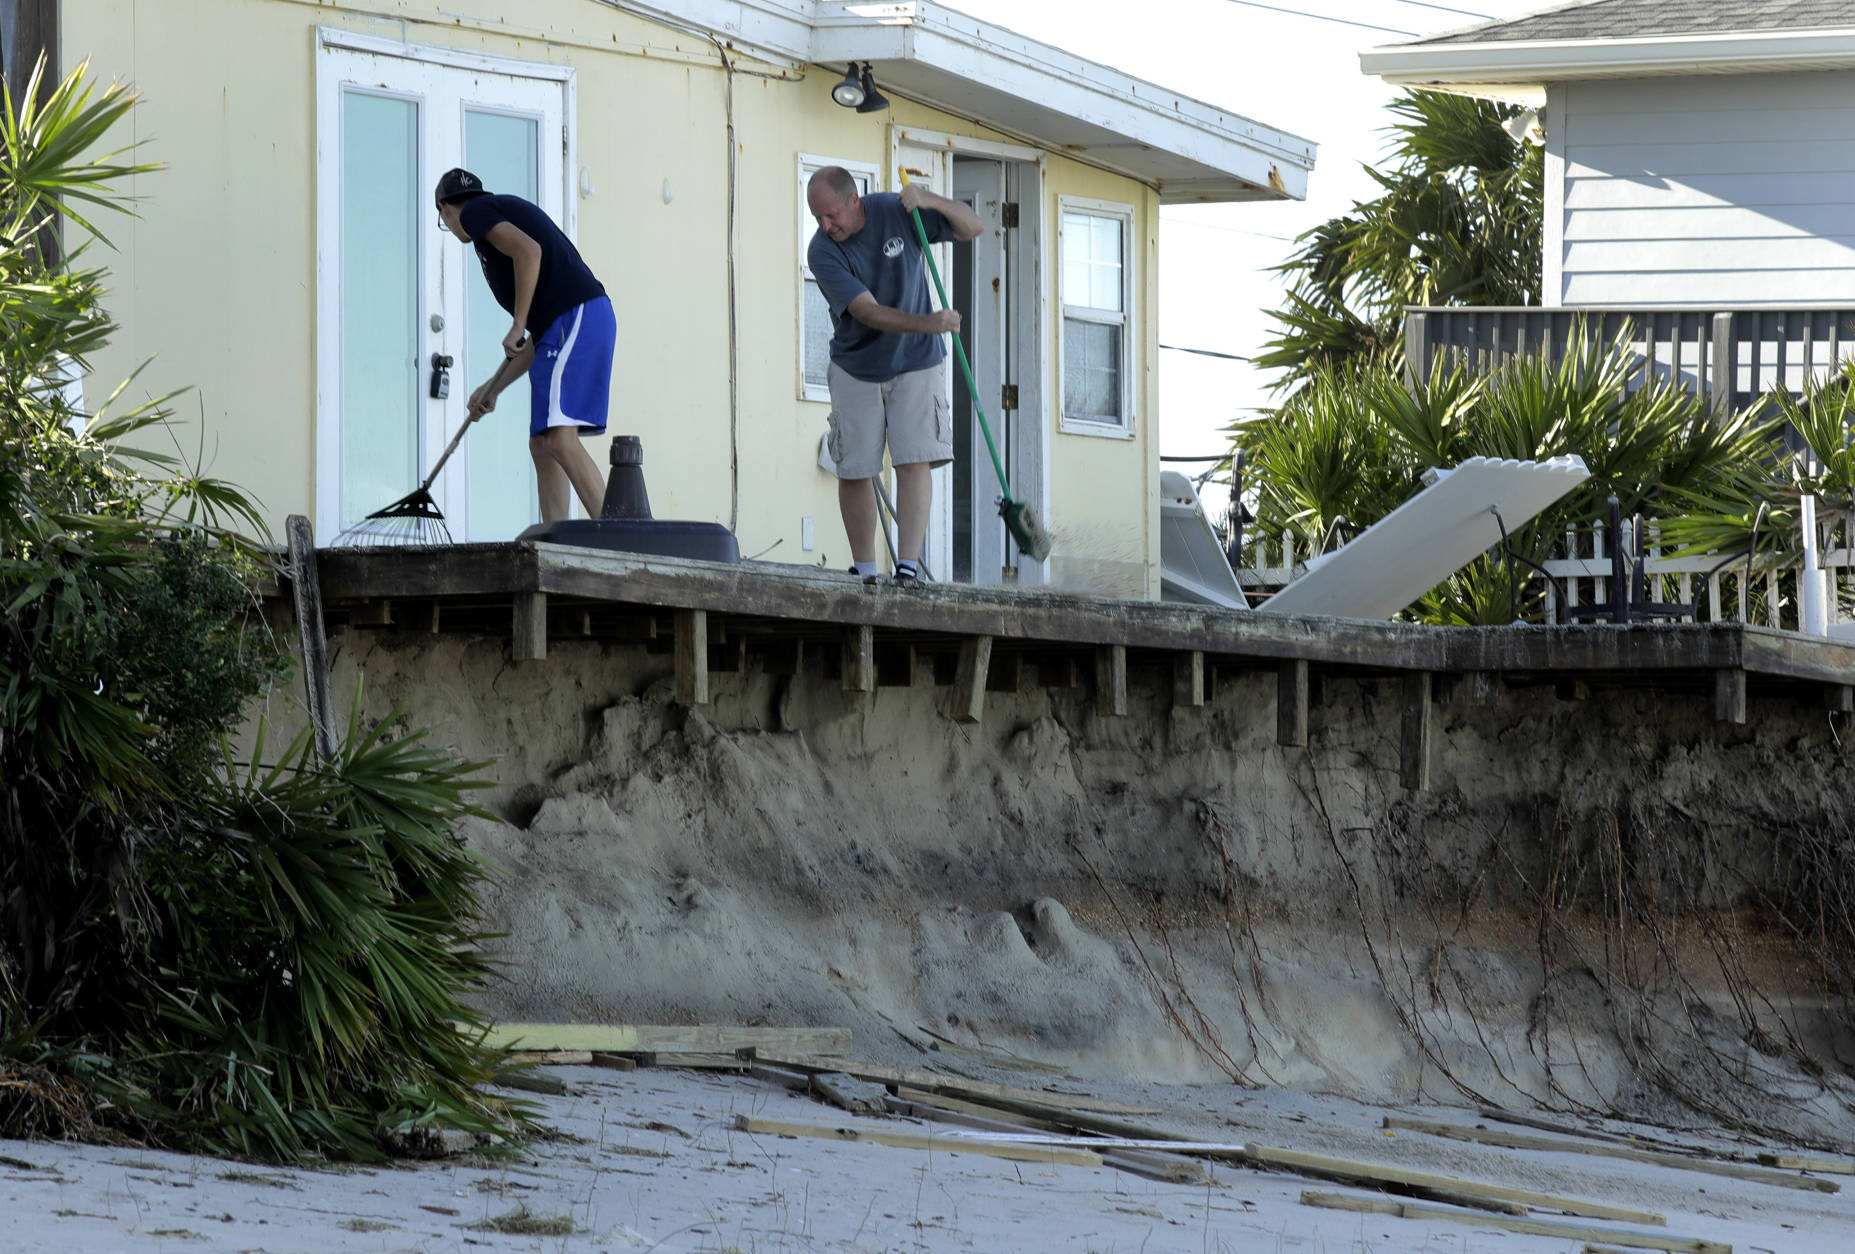 Rob Jakoby and his son Jake sweep debris off the eroded deck at his damaged beach home at Ponte Vedra Beach, Fla., Saturday, Oct. 8, 2016, after Hurricane Matthew passed through Friday. (AP Photo/Charlie Riedel)